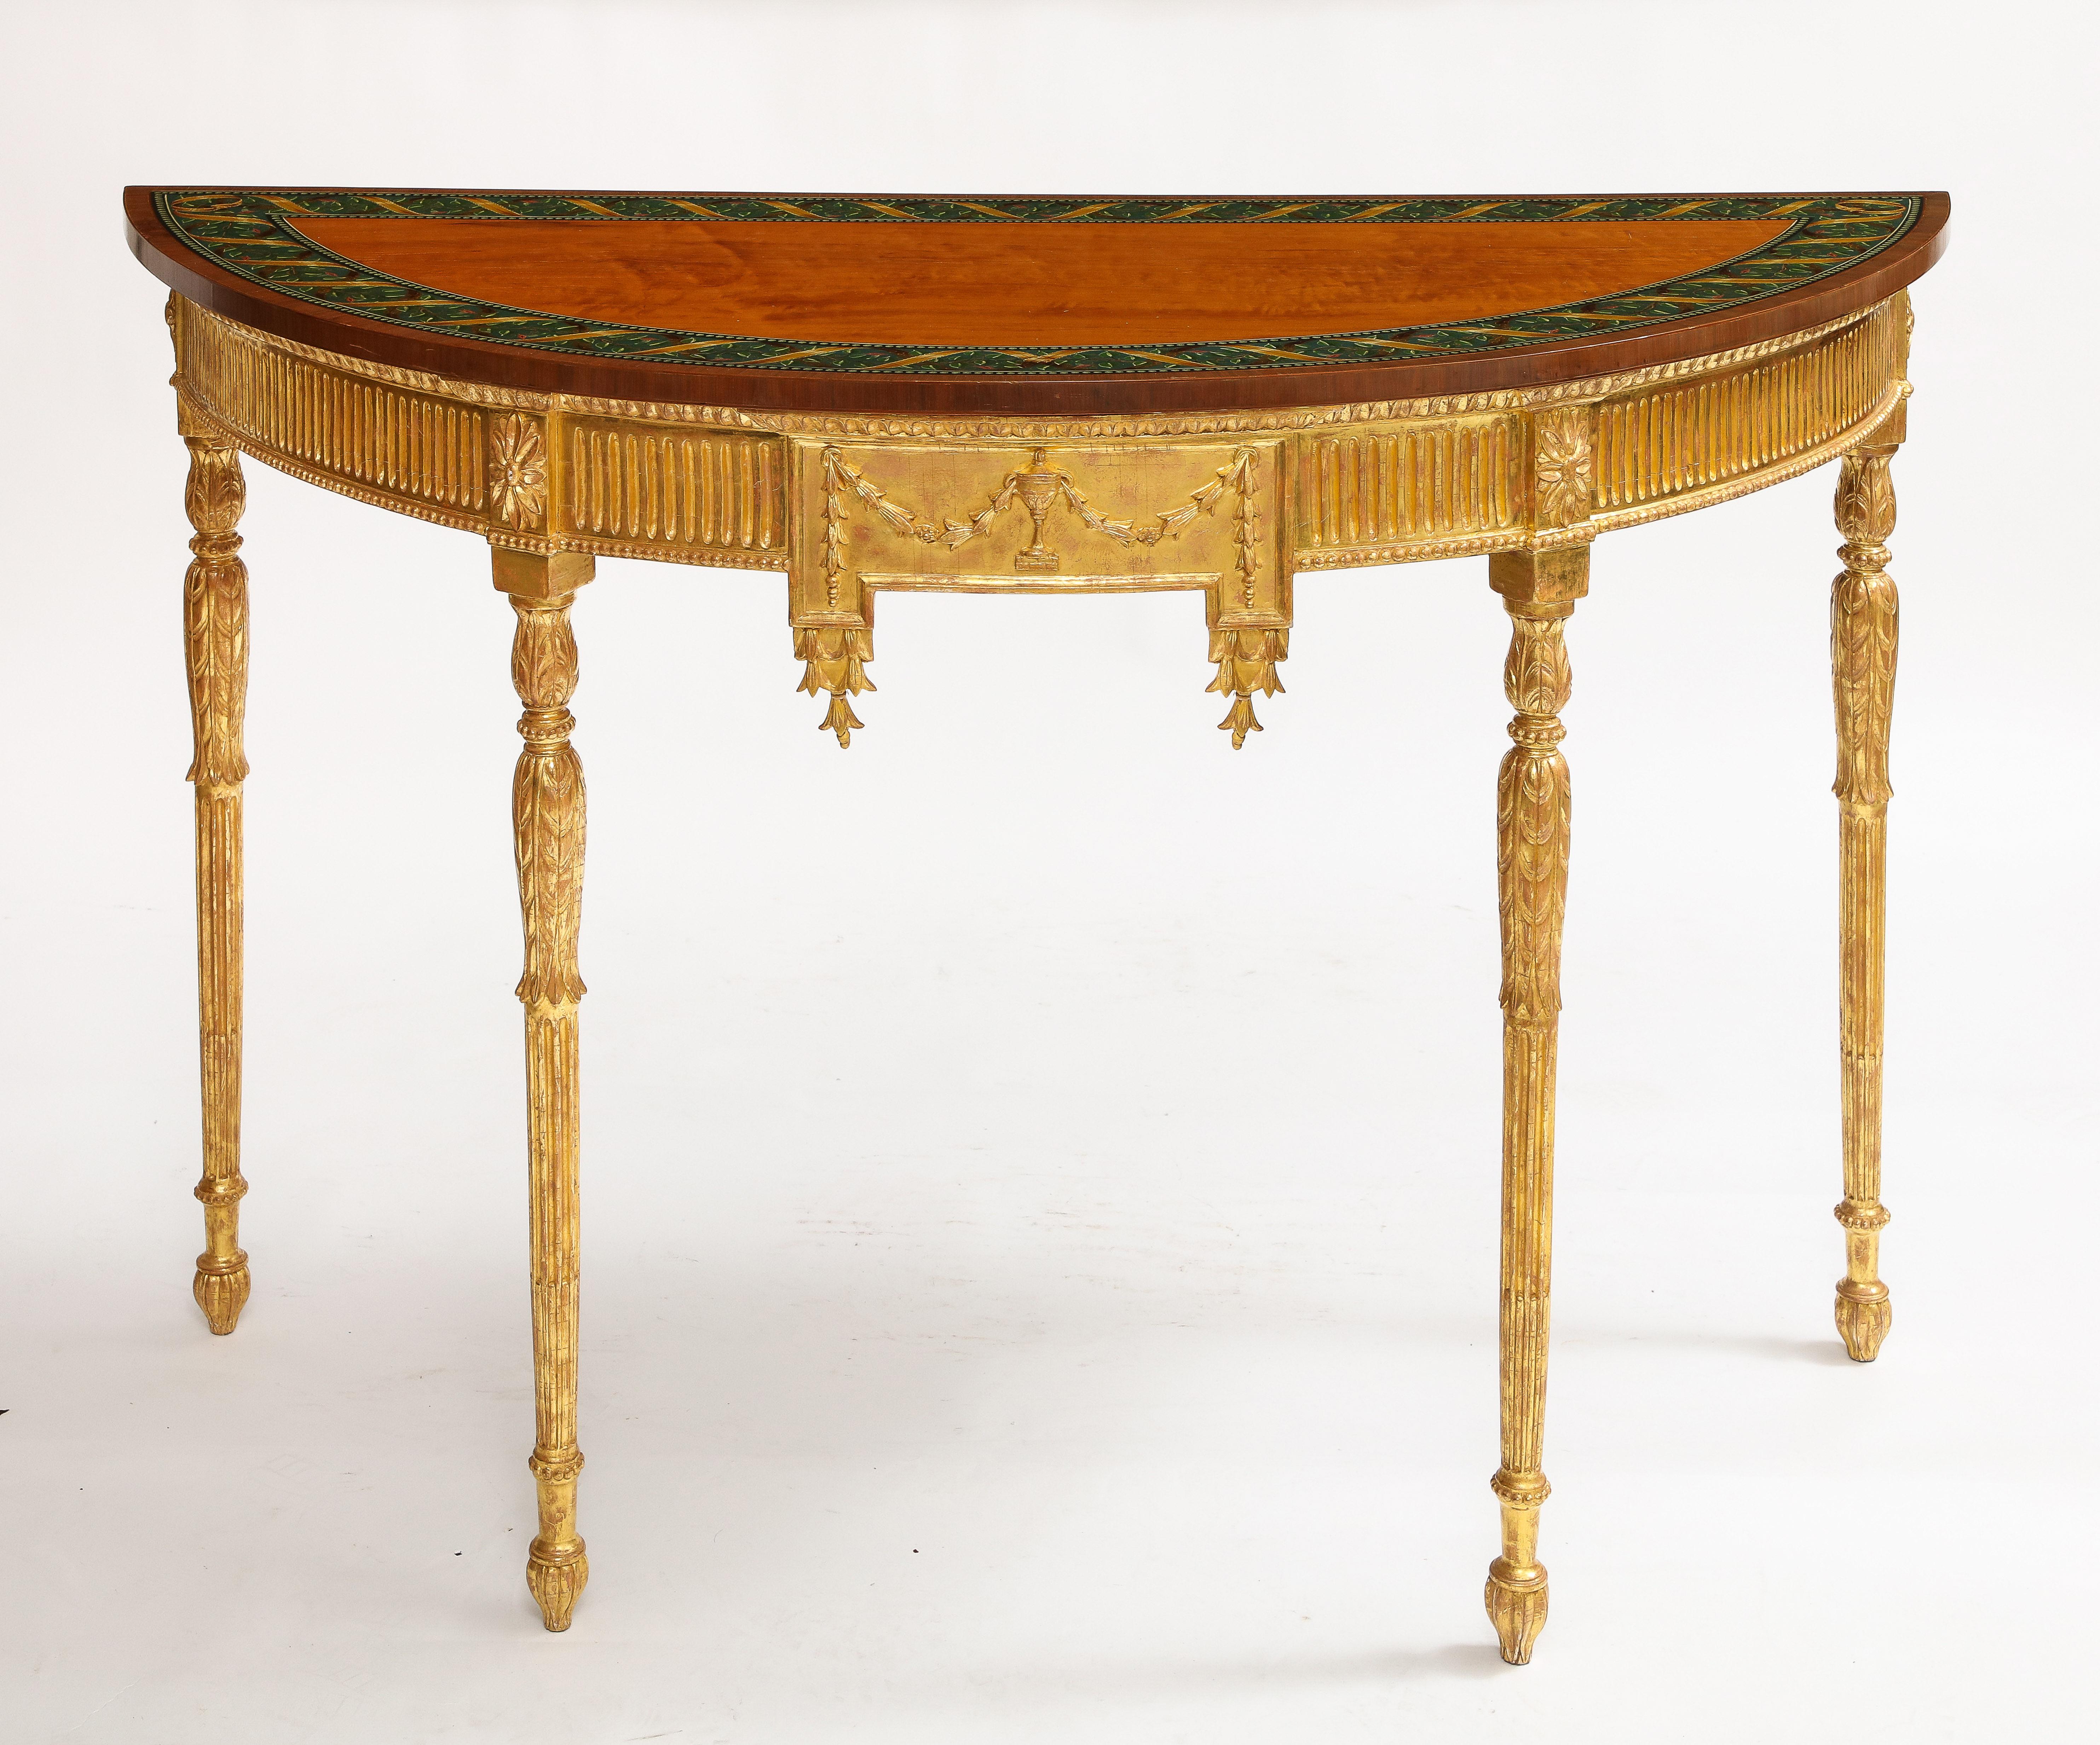 English A Pair of 18th C. George III Gilt-Wood Demi-lune Consoles tables w/ Painted Tops For Sale